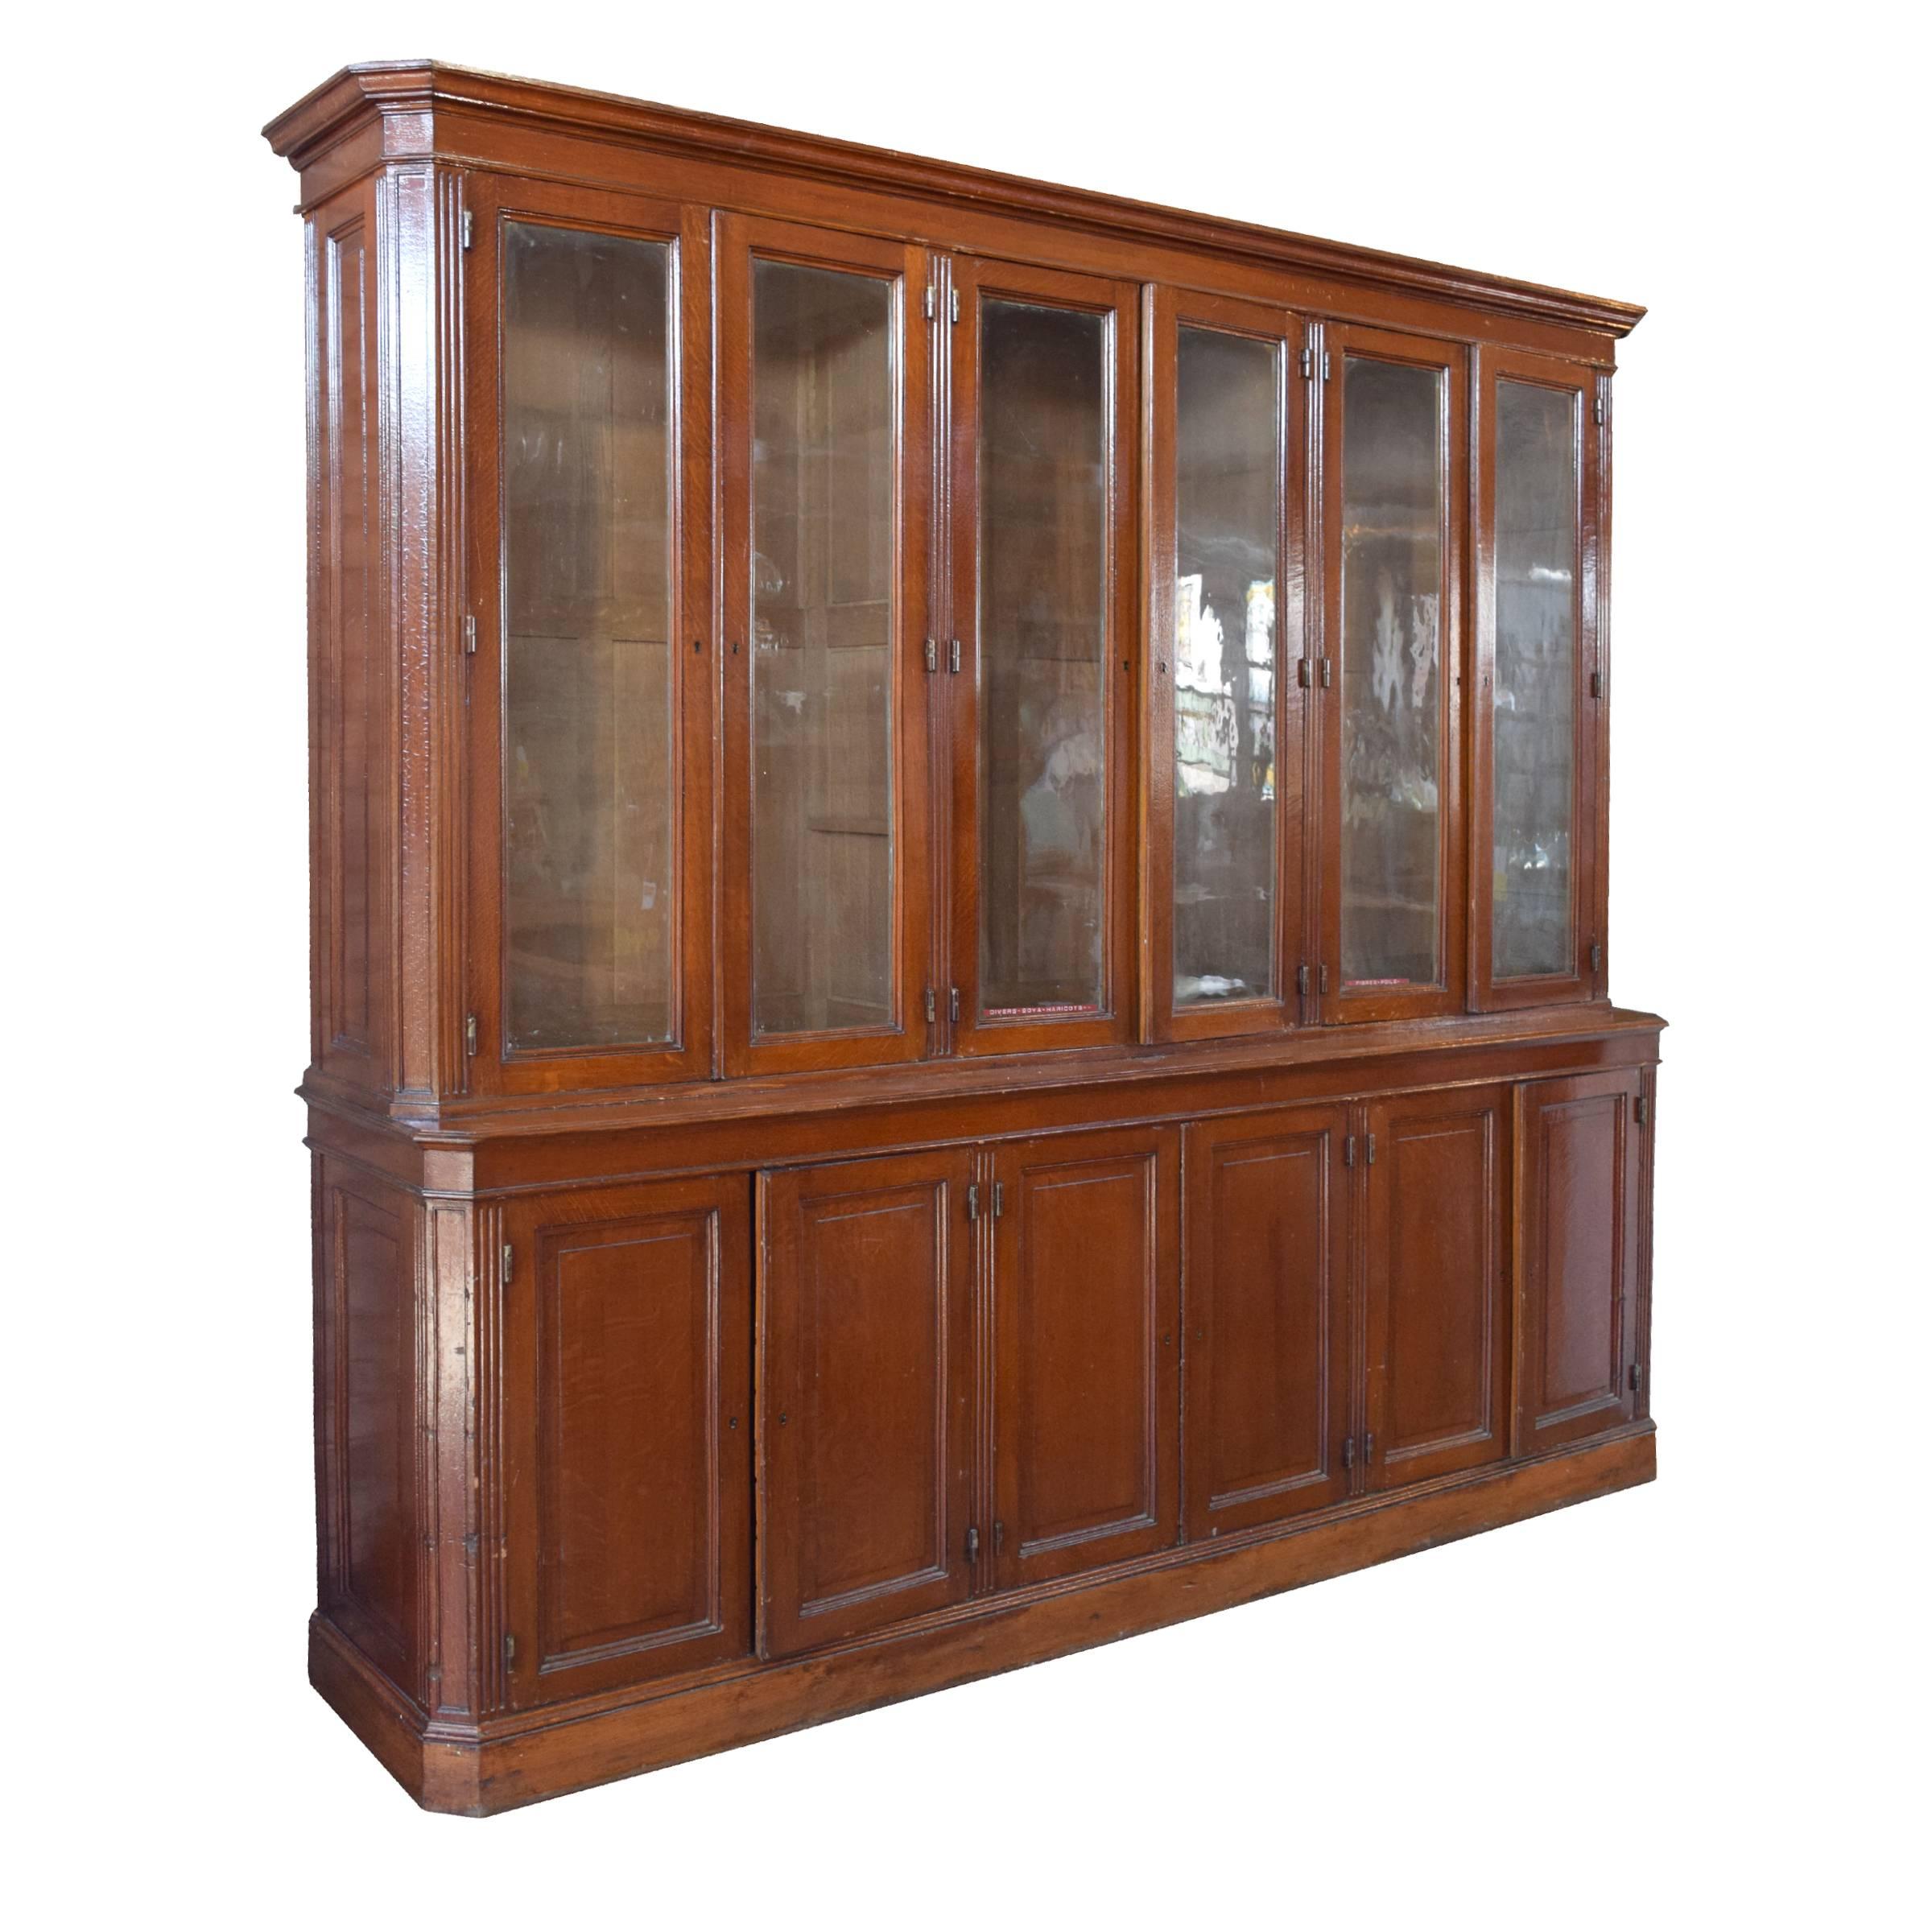 A fantastic French wood display cabinet with six glass doors on top and six wood doors on the bottom, and great hardware, circa 1900.